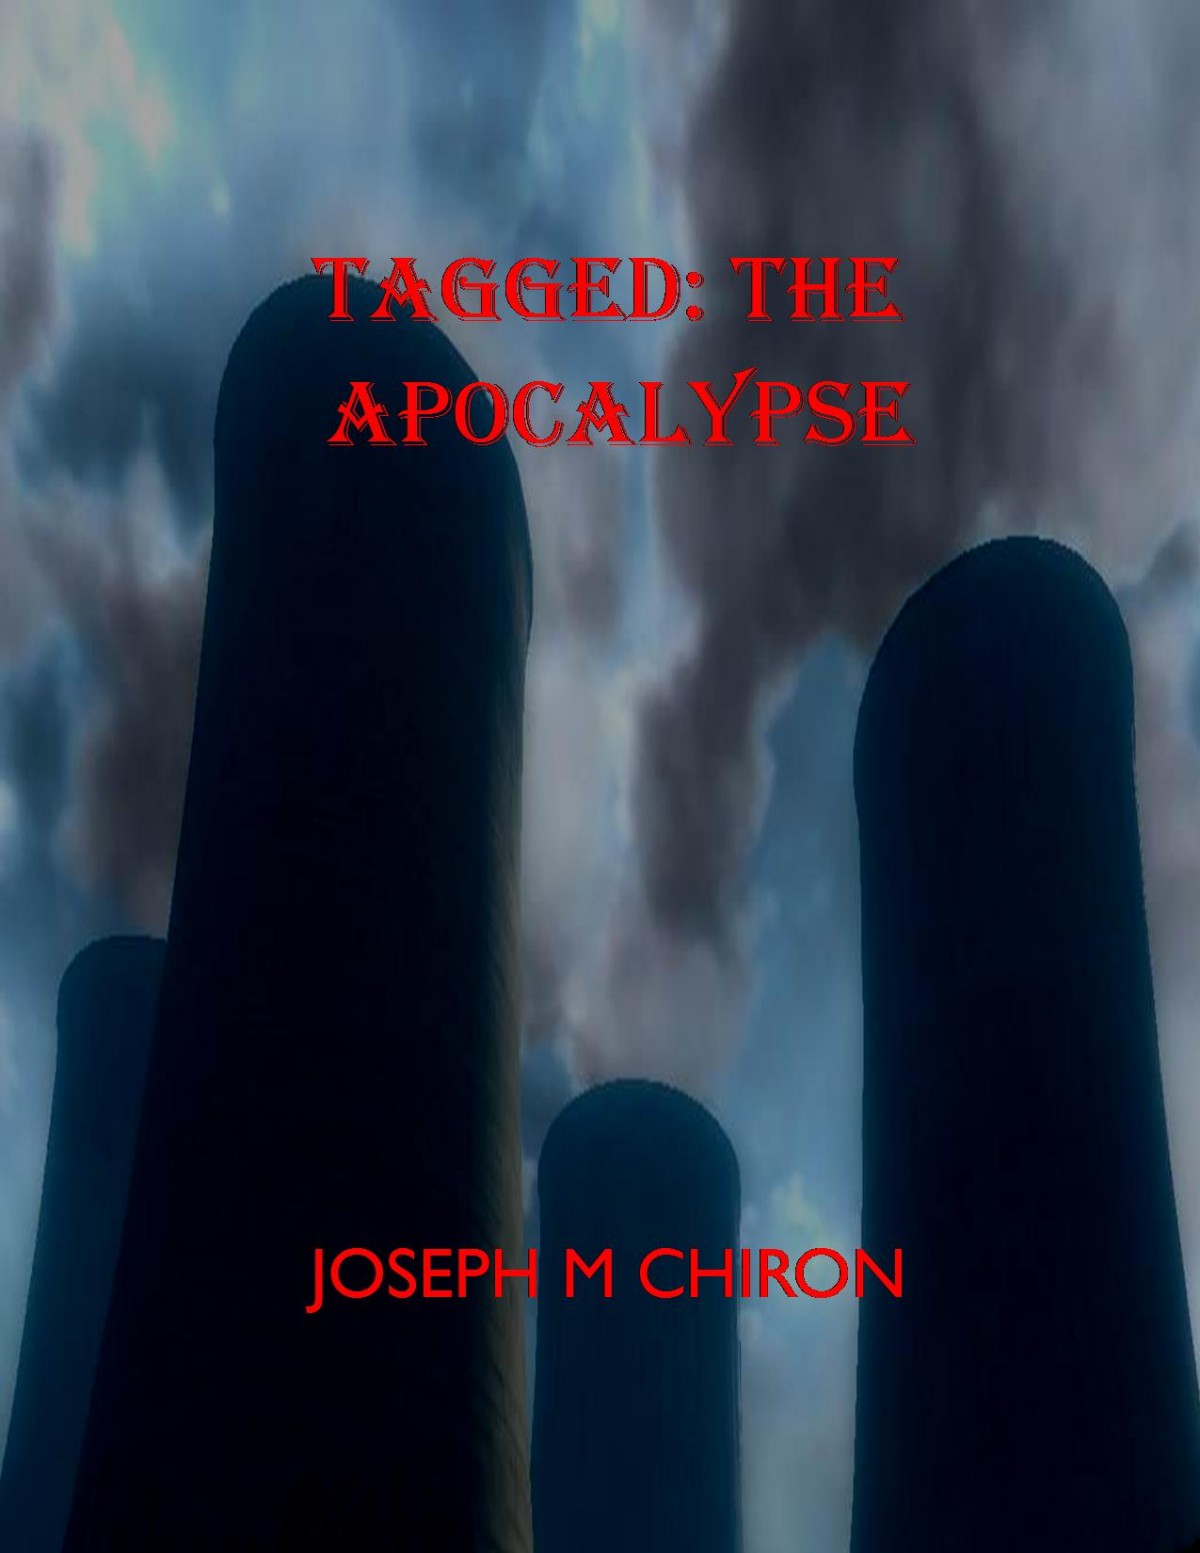 Tagged: The Apocalypse